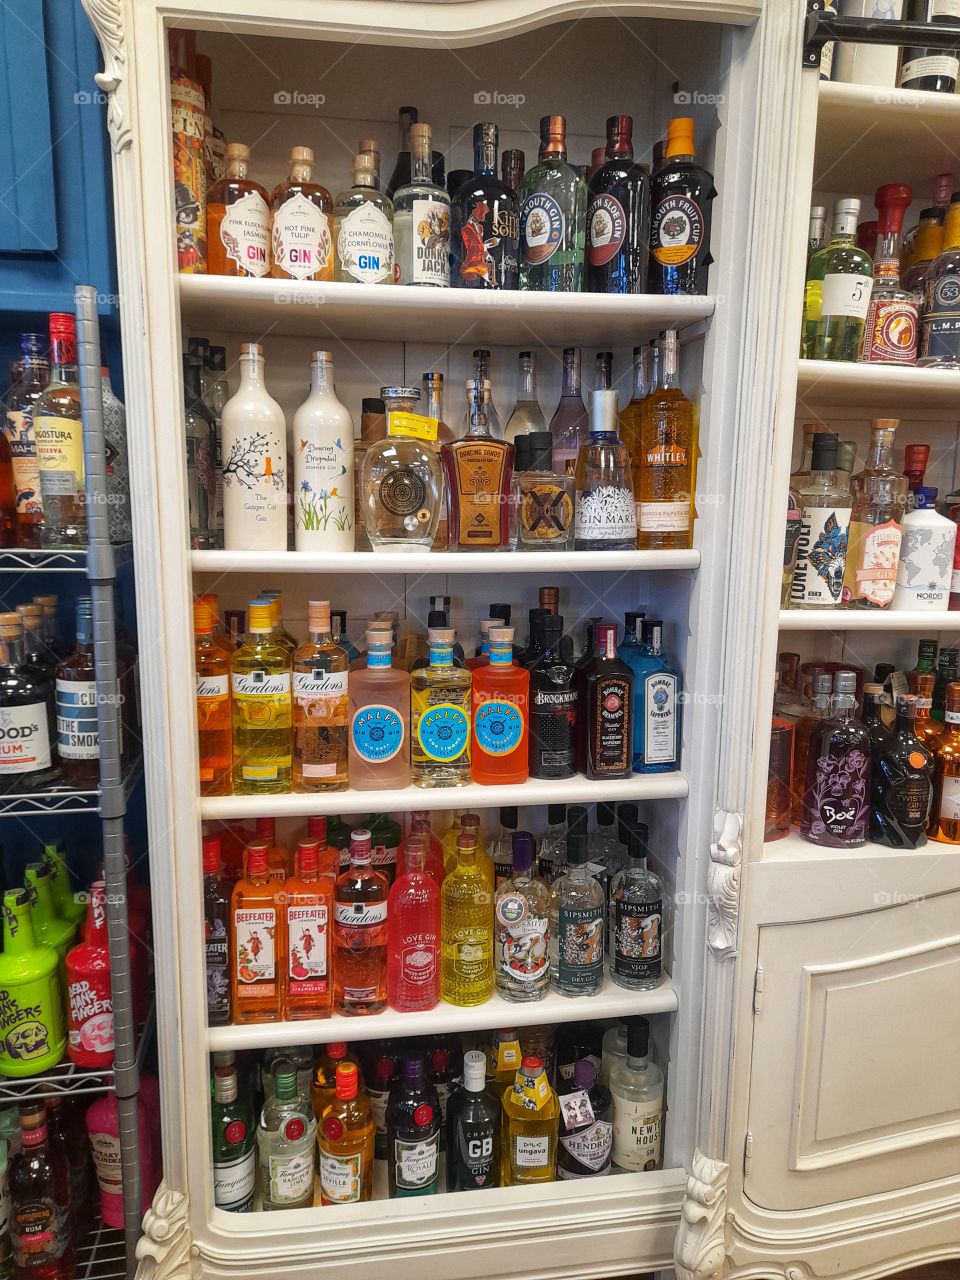 Variety of we'll-known brands of gin on shelf.